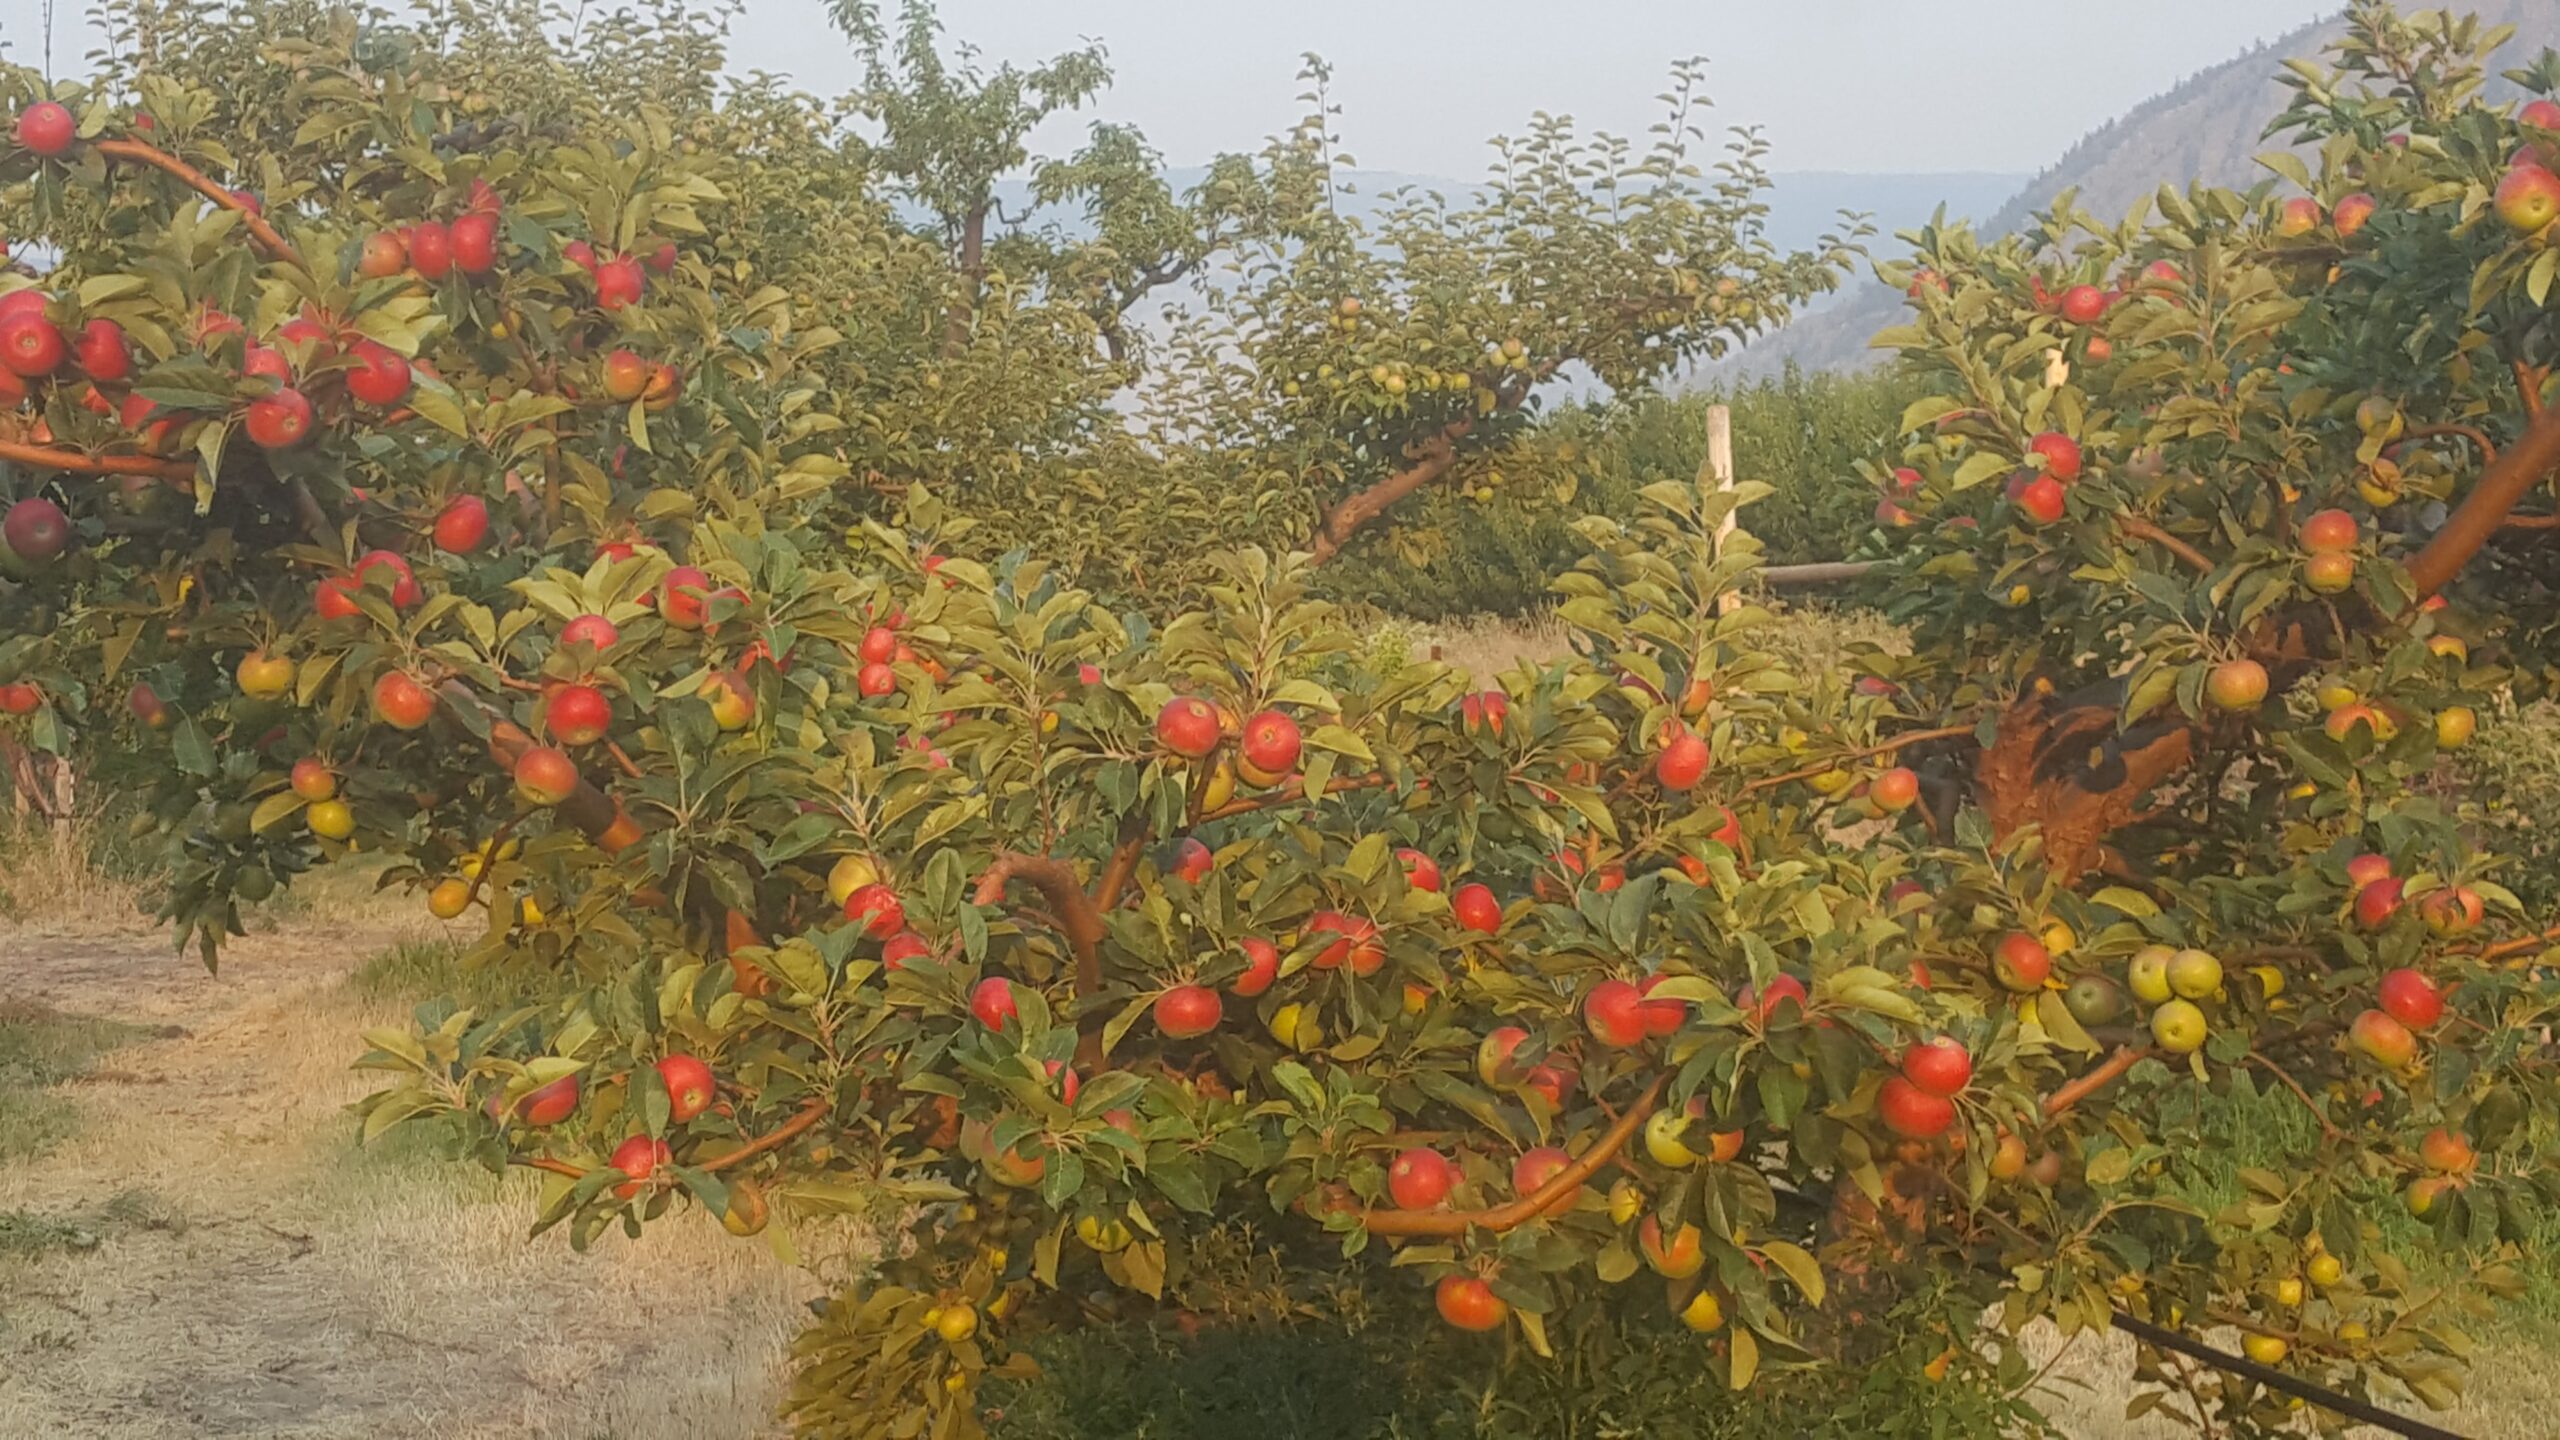 Orchard Harvest Update August 11, 2017